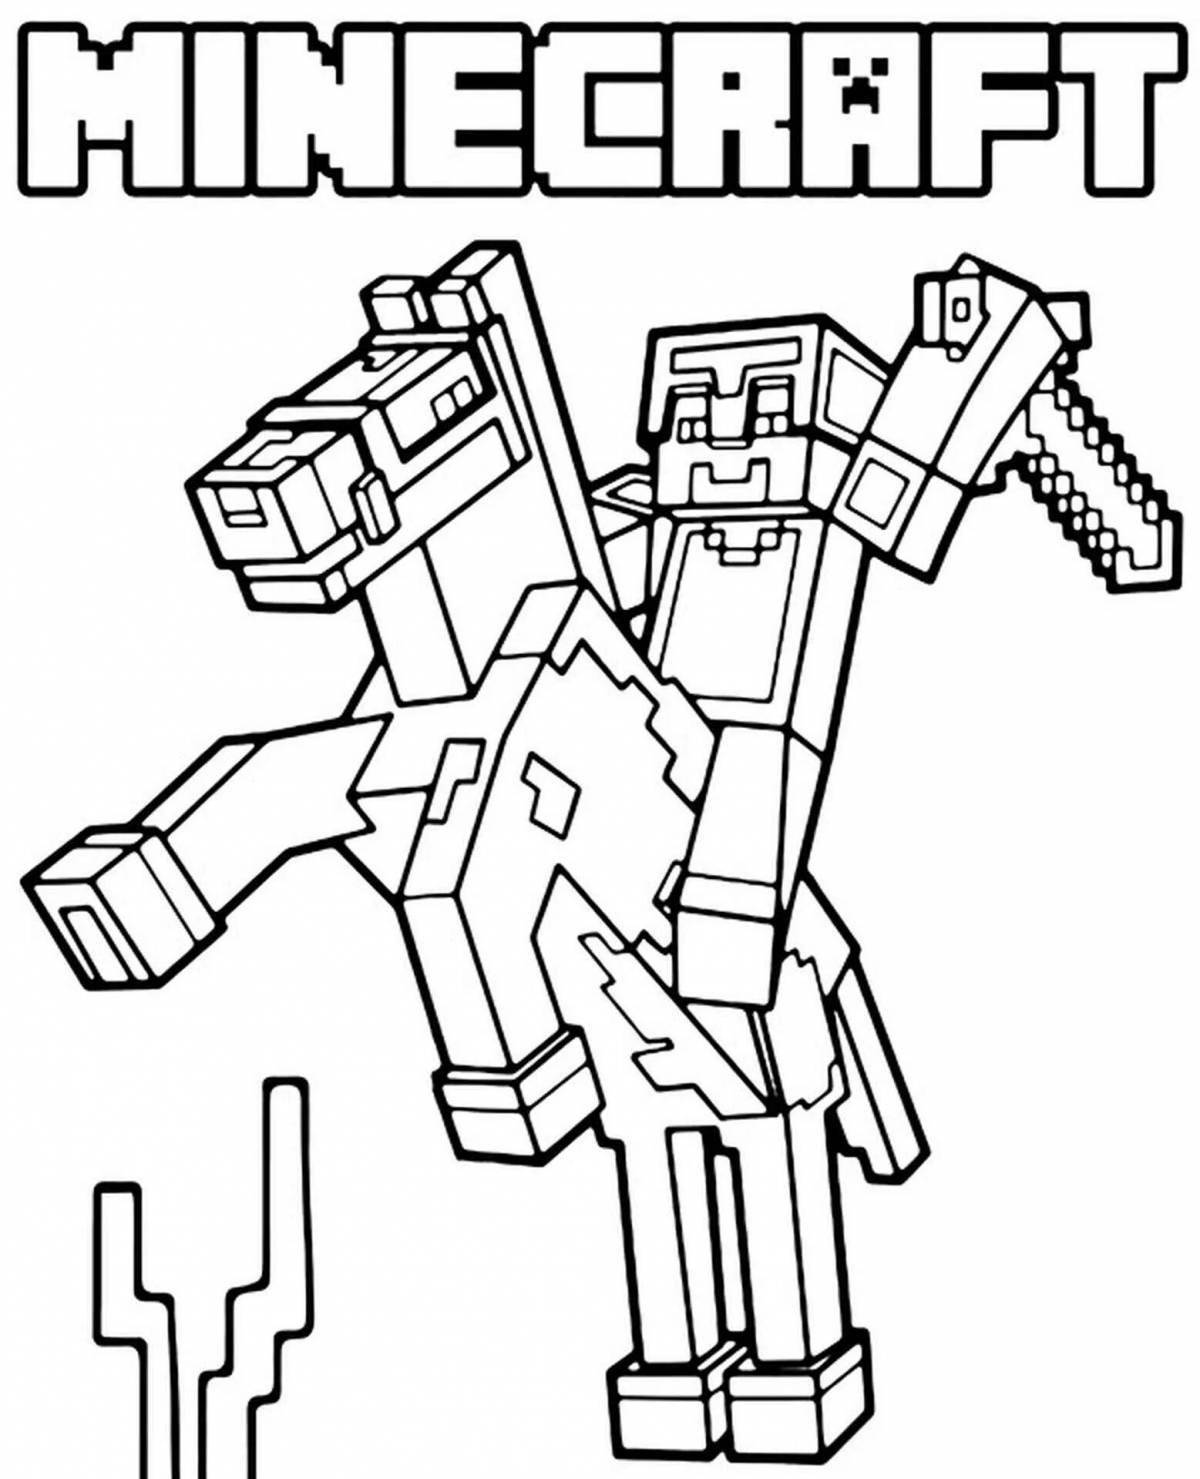 Excellent cool minecraft coloring for boys